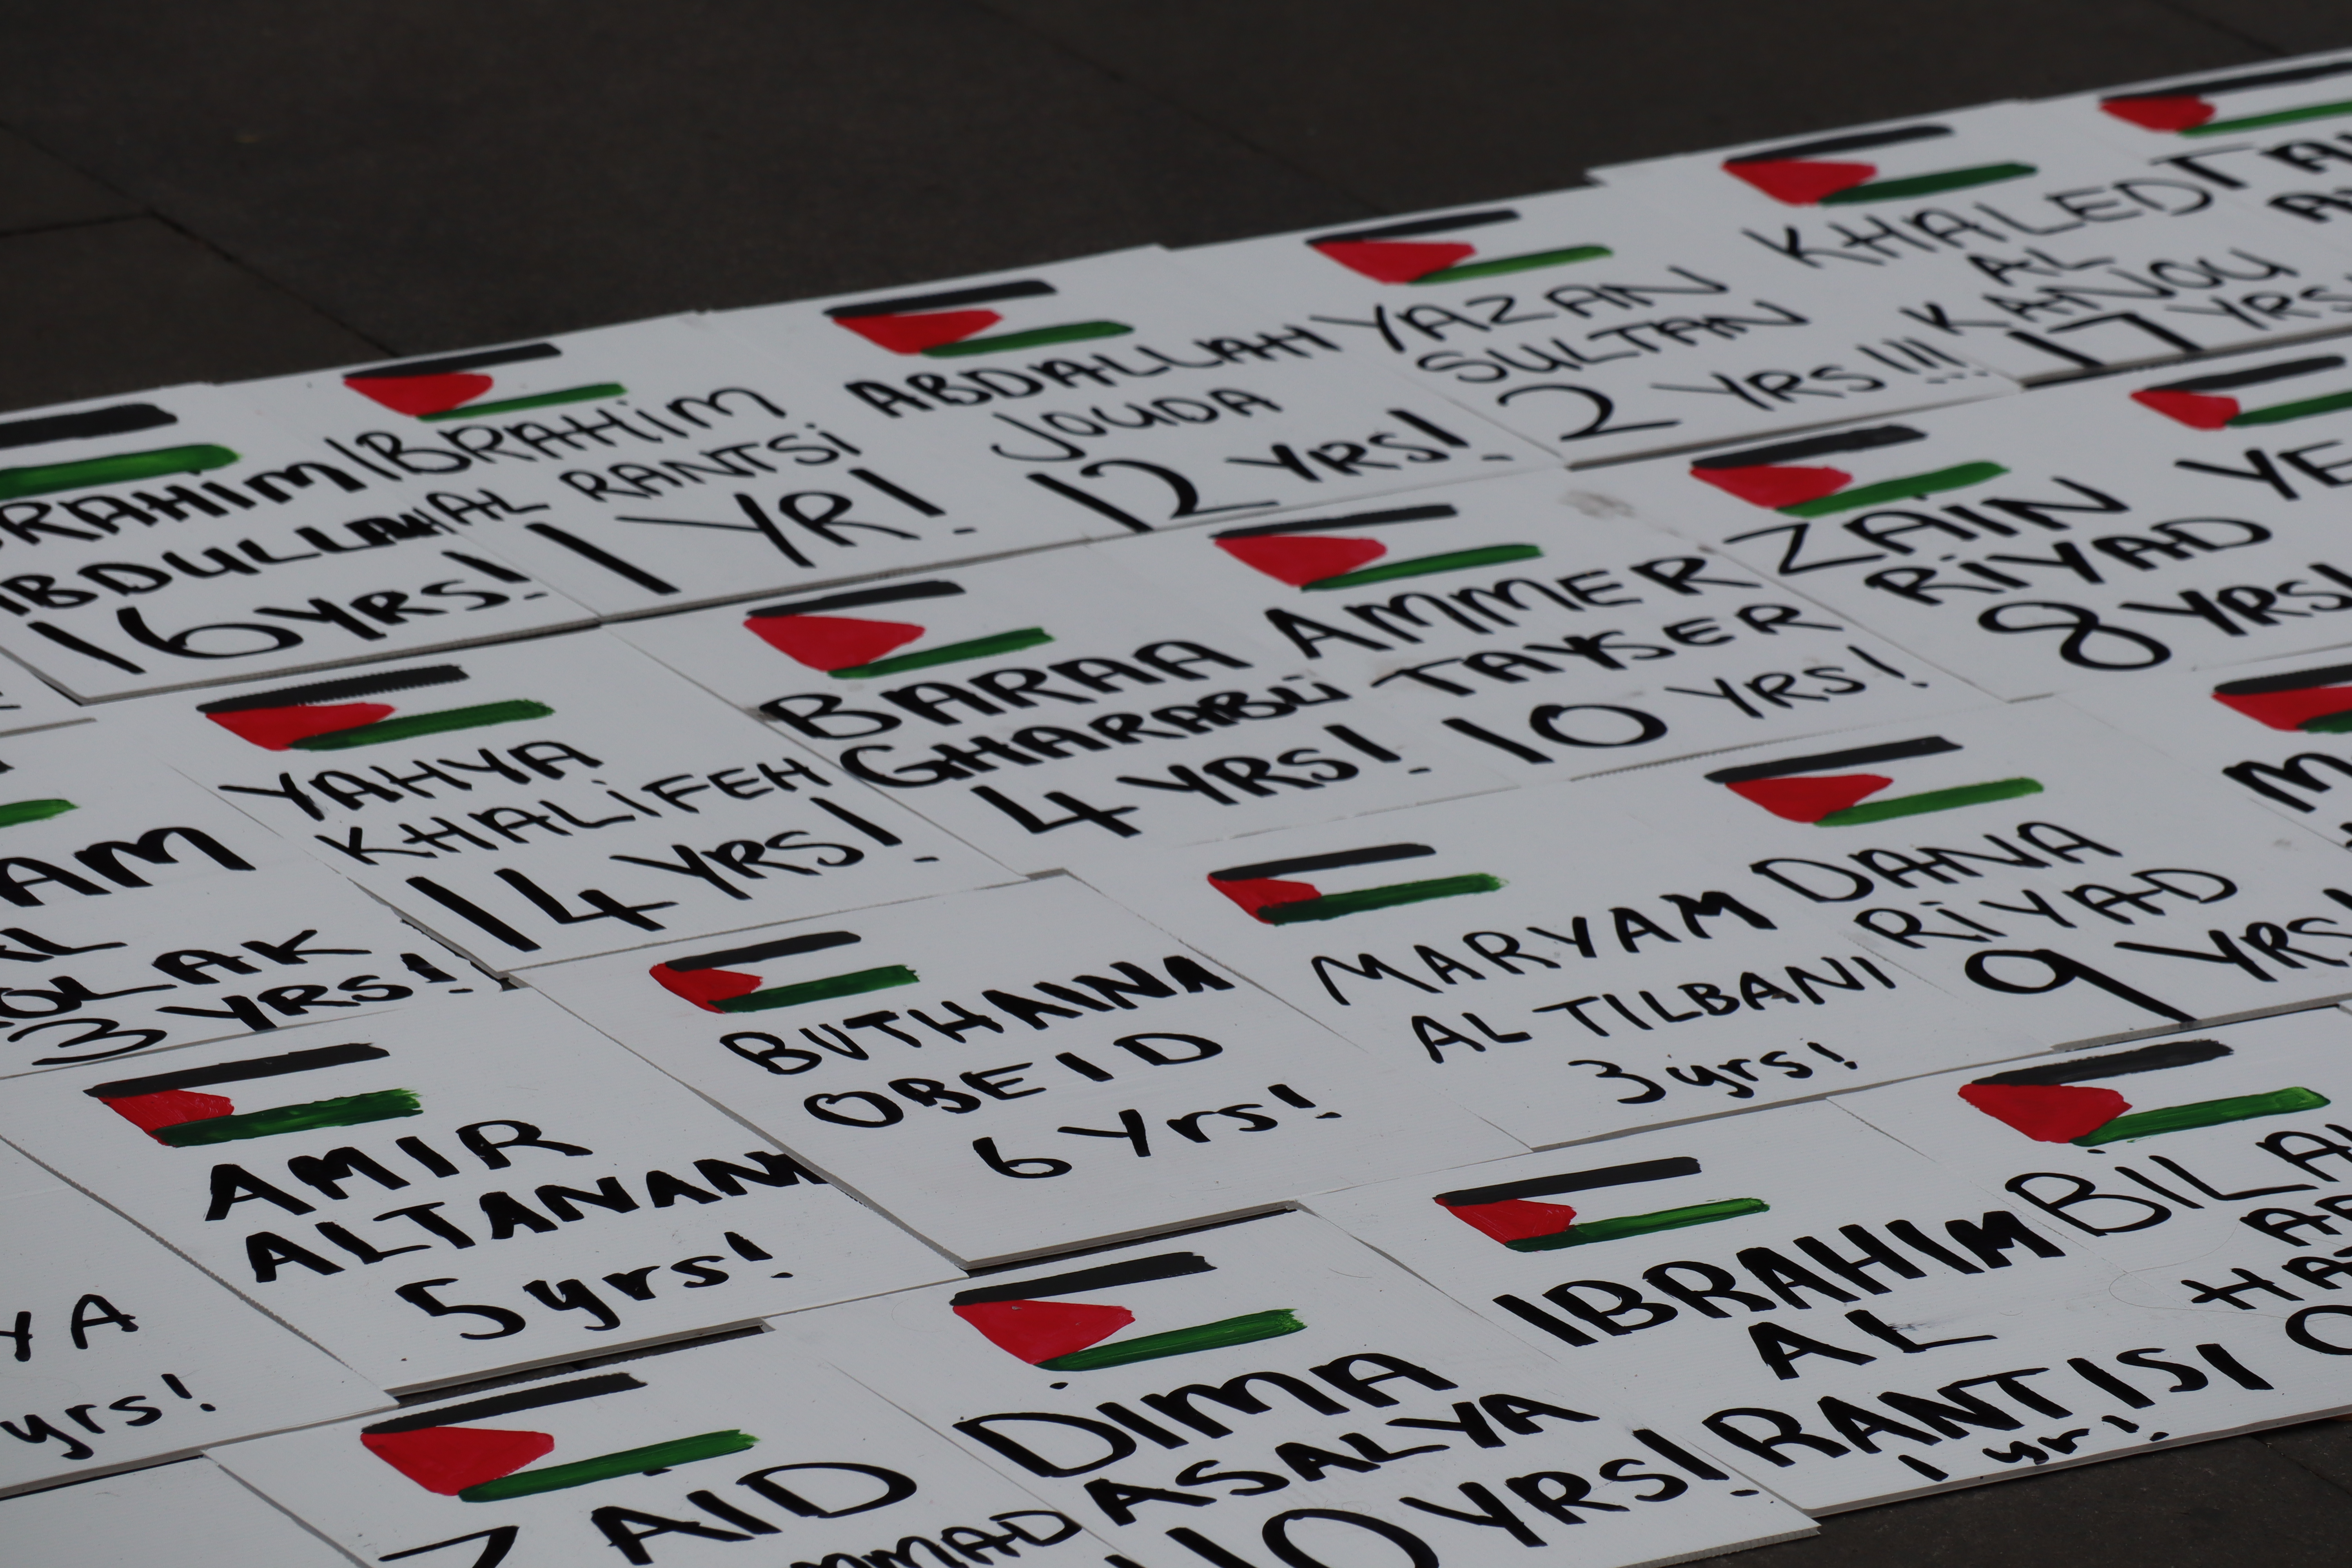 The names of Palestinian children killed in the latest conflict